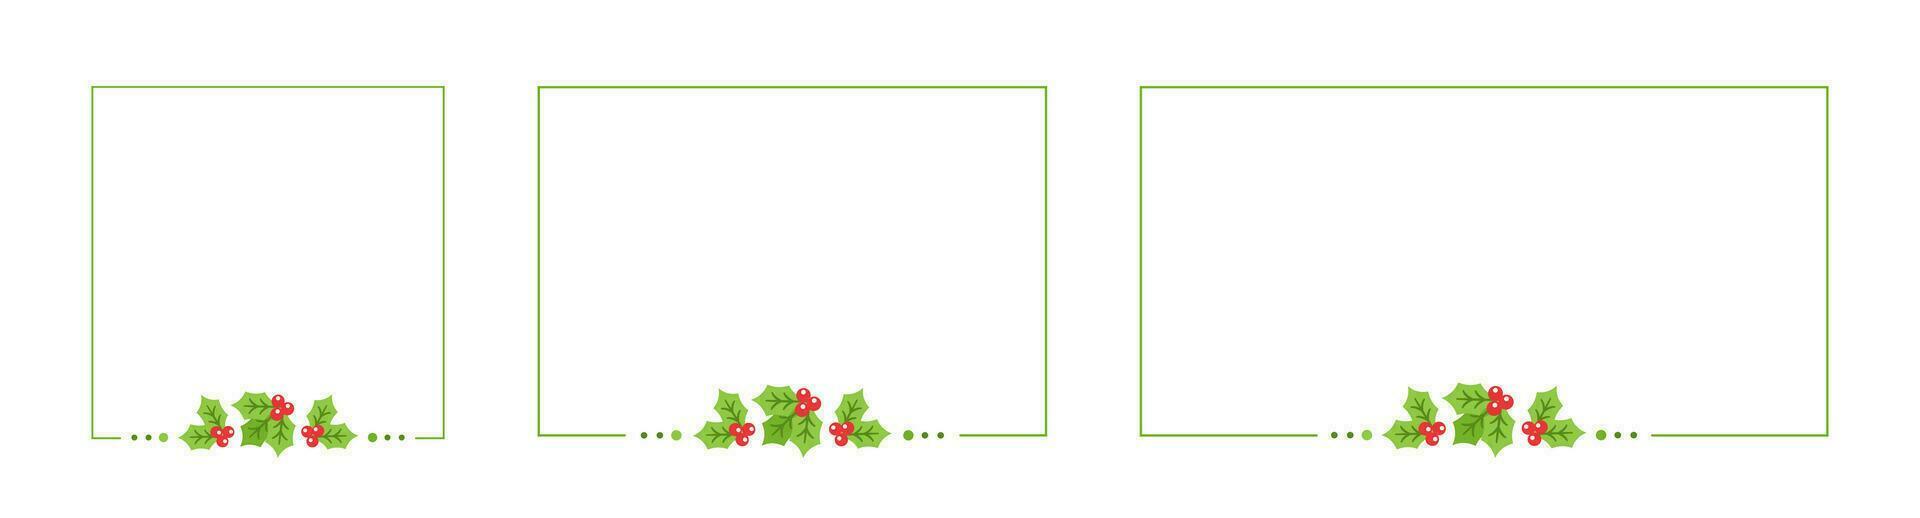 Square and Rectangle Mistletoe Frame Set, Christmas and New Year Card Template, Winter Holiday Season Design Border. Vector Illustration for greetings, invitation, social media post.